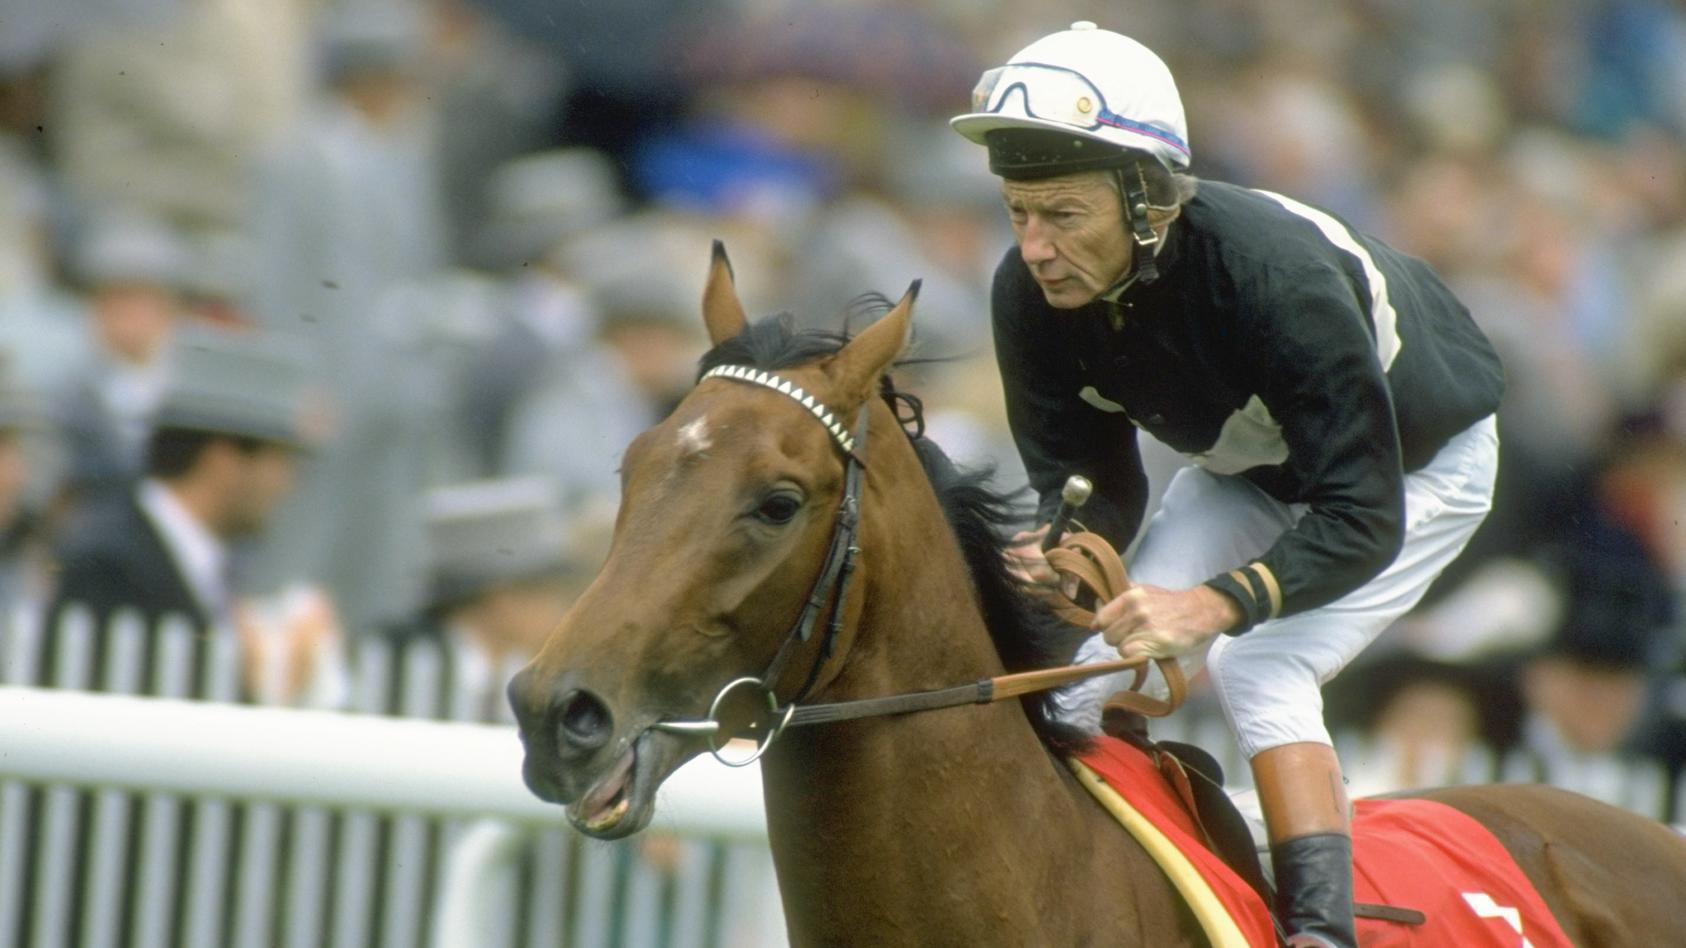 (FILE PHOTO) According to reports on May 29, 2022 legendary English jockey Lester Piggott has died aged 86. Jun 1991:  Lester Piggott of Great Britain on Hokusai at the start of the Ever Ready Derby at Epsom racecourse in Epsom, England.  Mandatory C